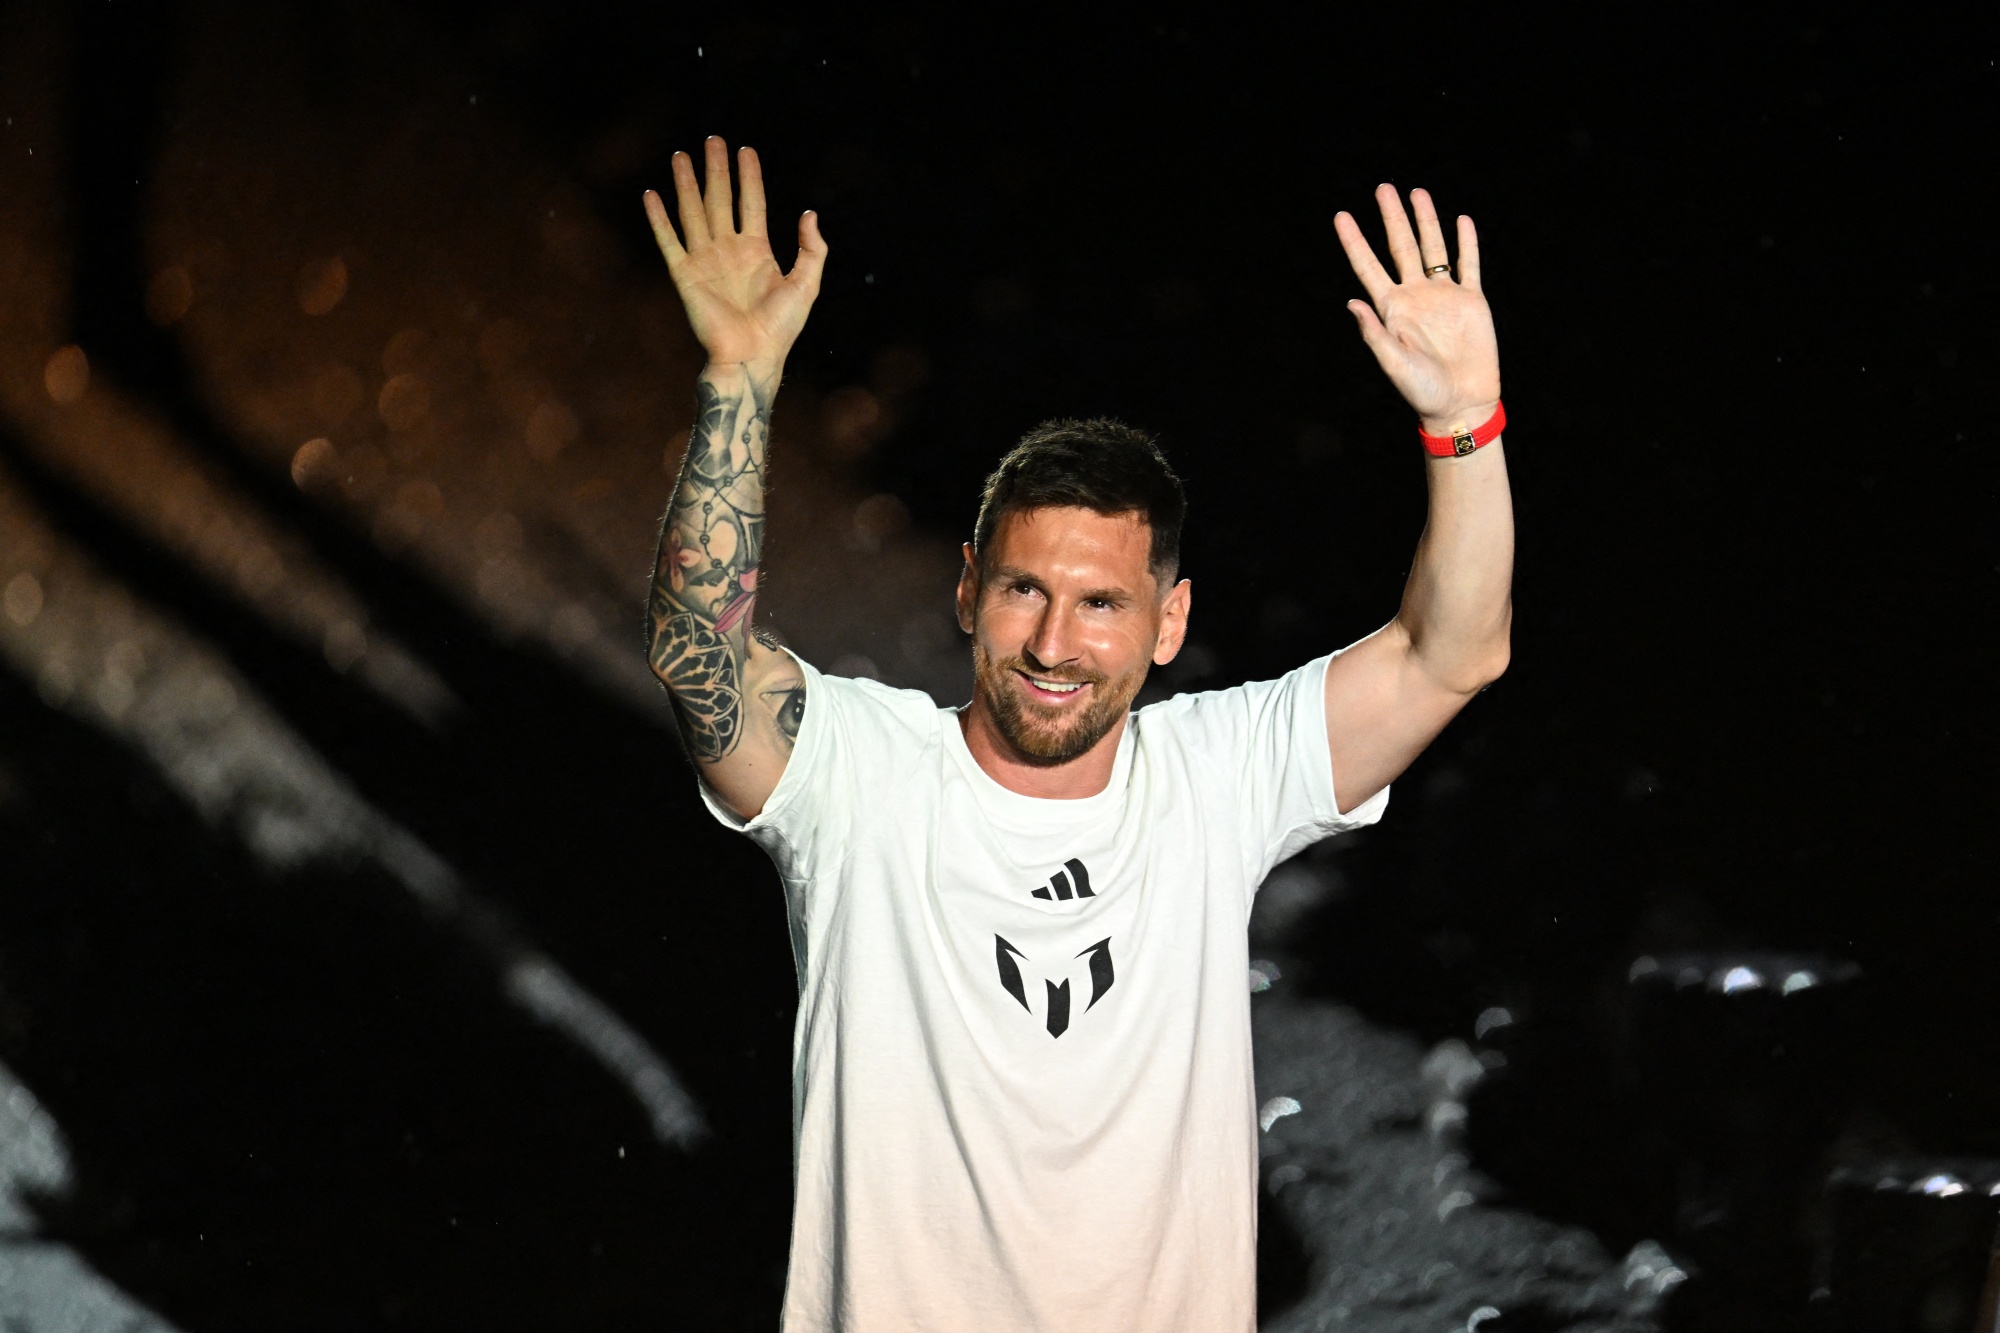 From Europe to Miami: How Lionel Messi's Big Move Shakes Up Soccer and Scores Big for Fans and Brands Alike